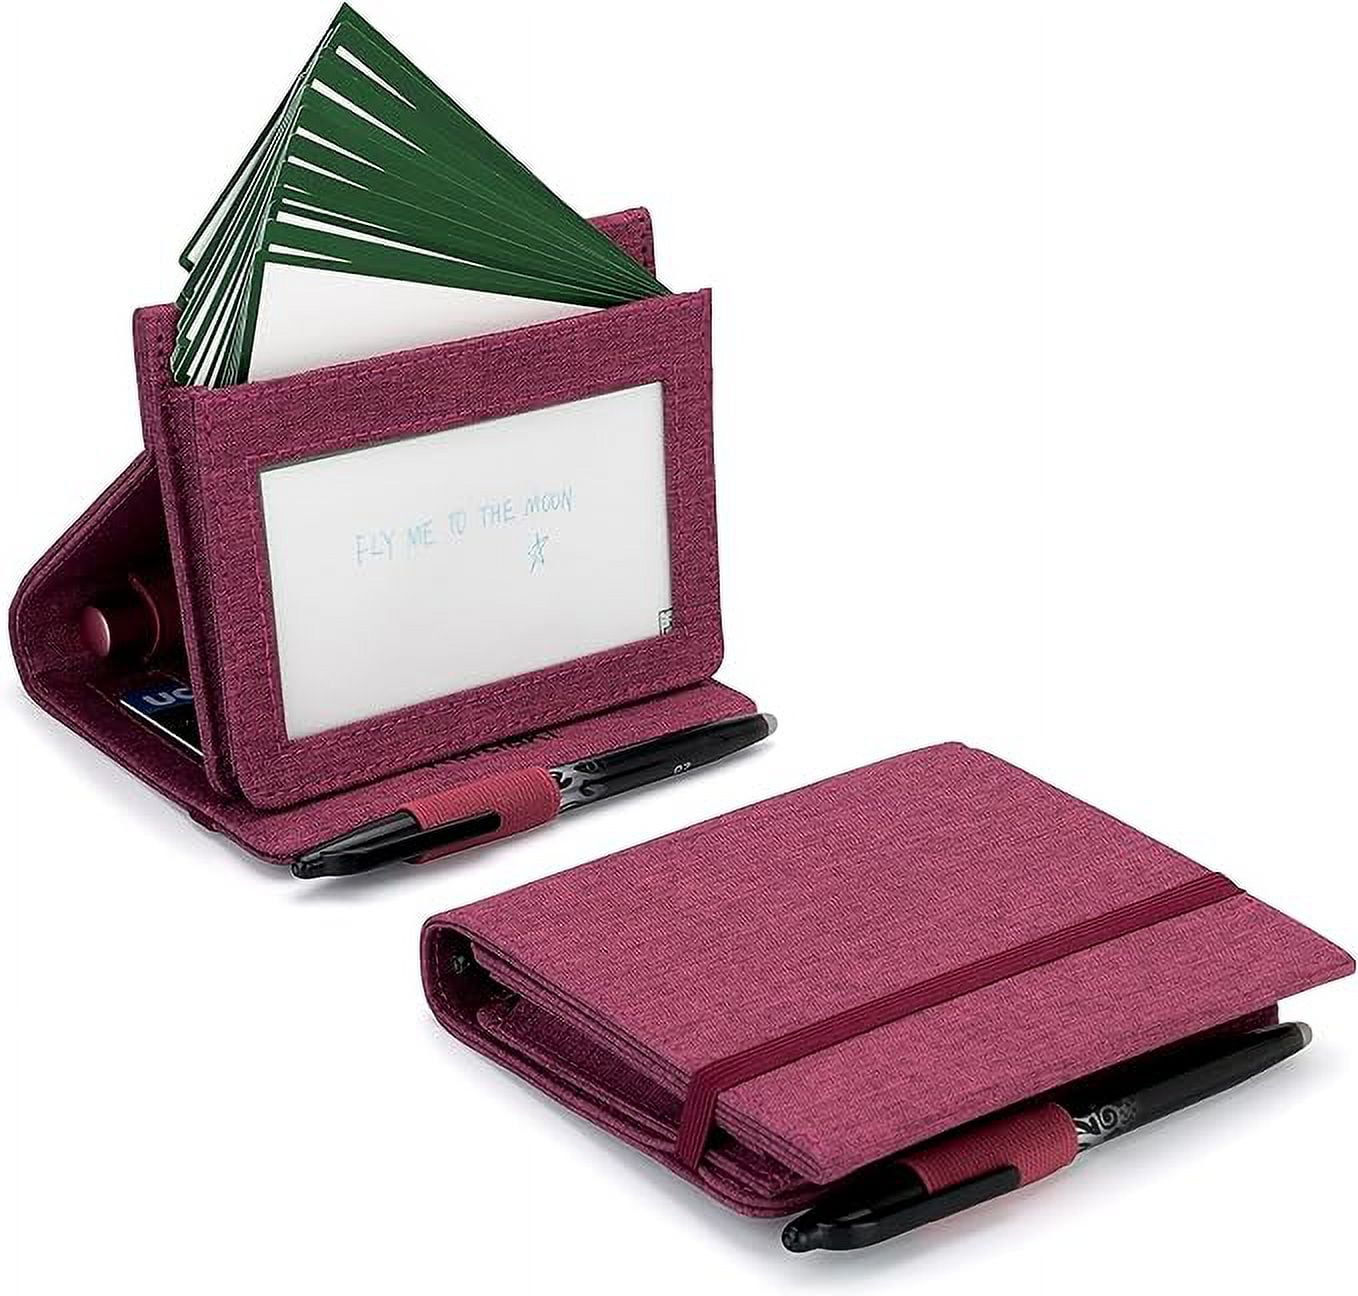 Index Card Holder Purple, 3x5 Note Flash Card Organizer Case, File Box with  5 Dividers, Notecard Box Holds 100 Cards, Also Available in Red, Blue,  Green, Pink, Grey, 4 Pack – By Enday 